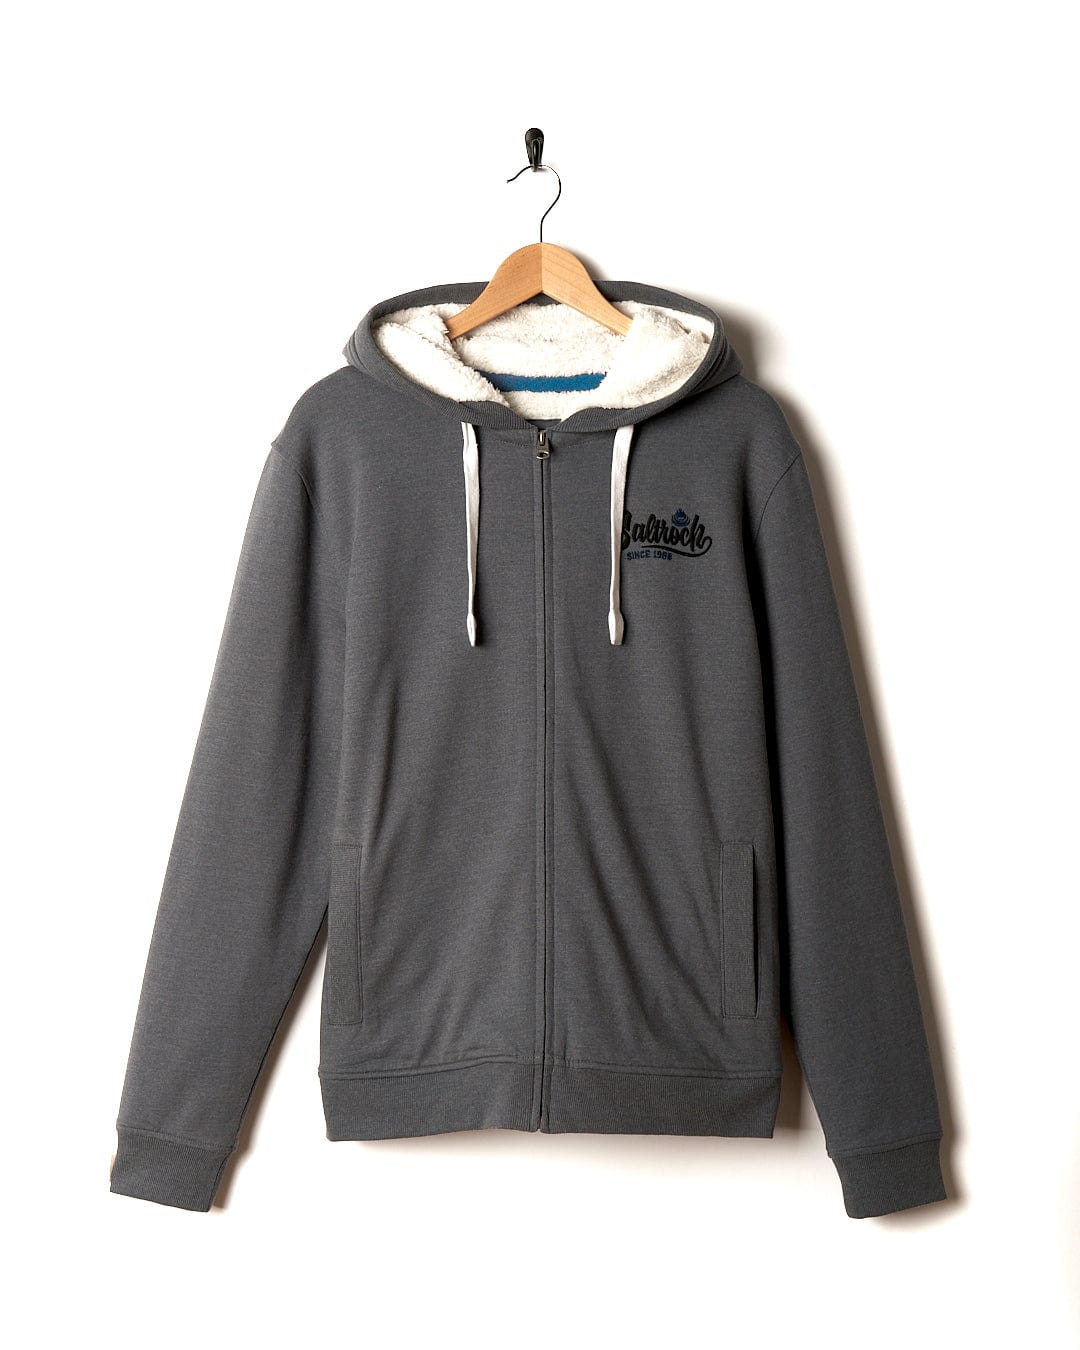 A Saltrock Speed - Mens Borg Lined Hoodie - Grey hanging on a hanger.